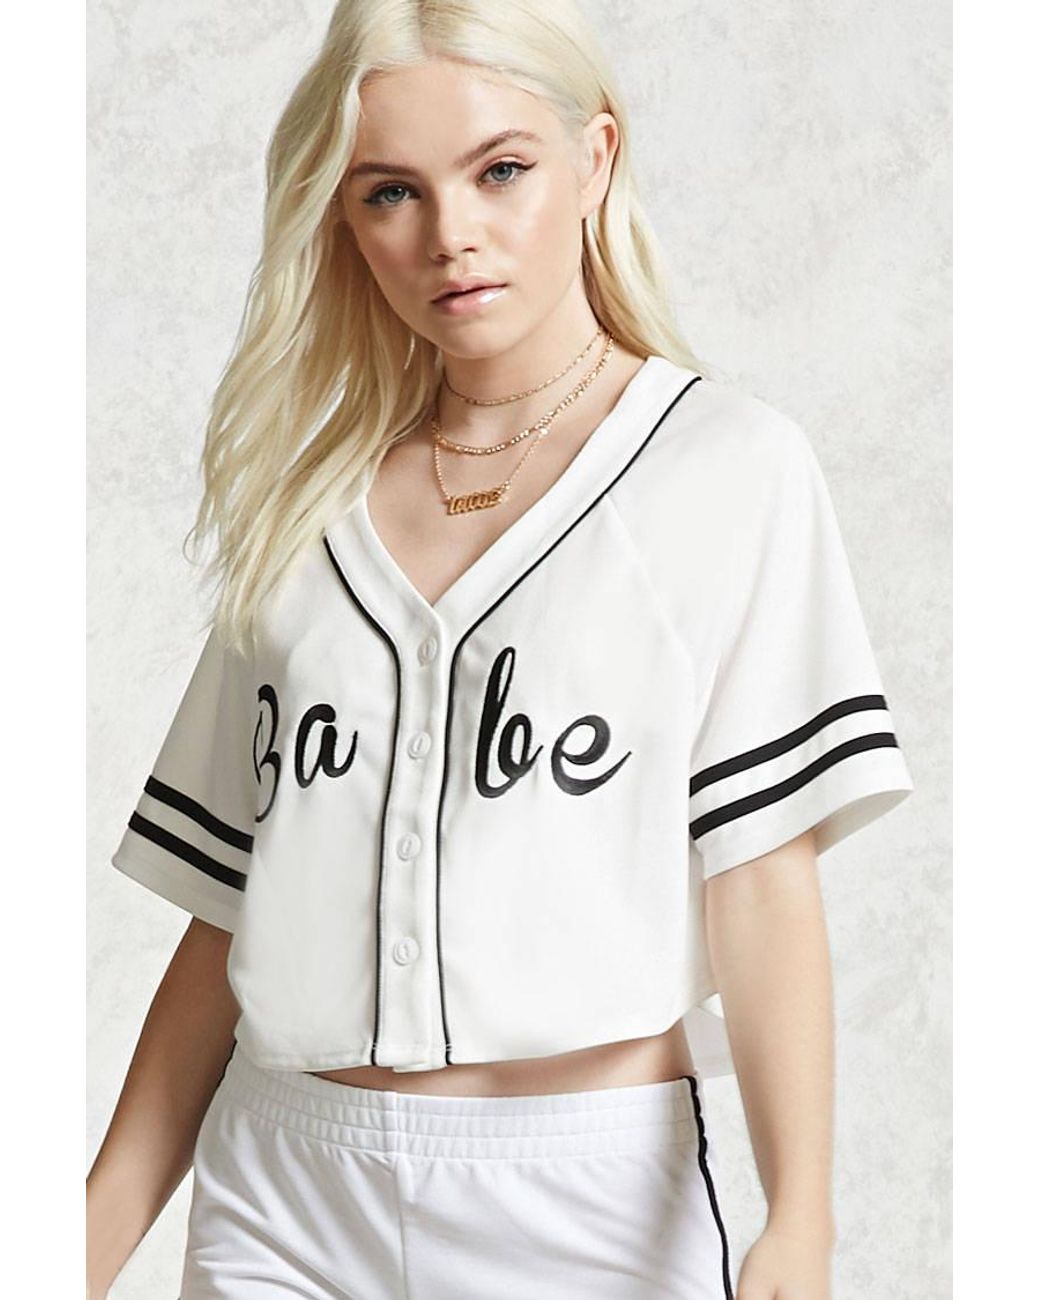 Squeak Regeneration Discolor Forever 21 Synthetic Babe Cropped Baseball Jersey in White/Black (White) |  Lyst Canada